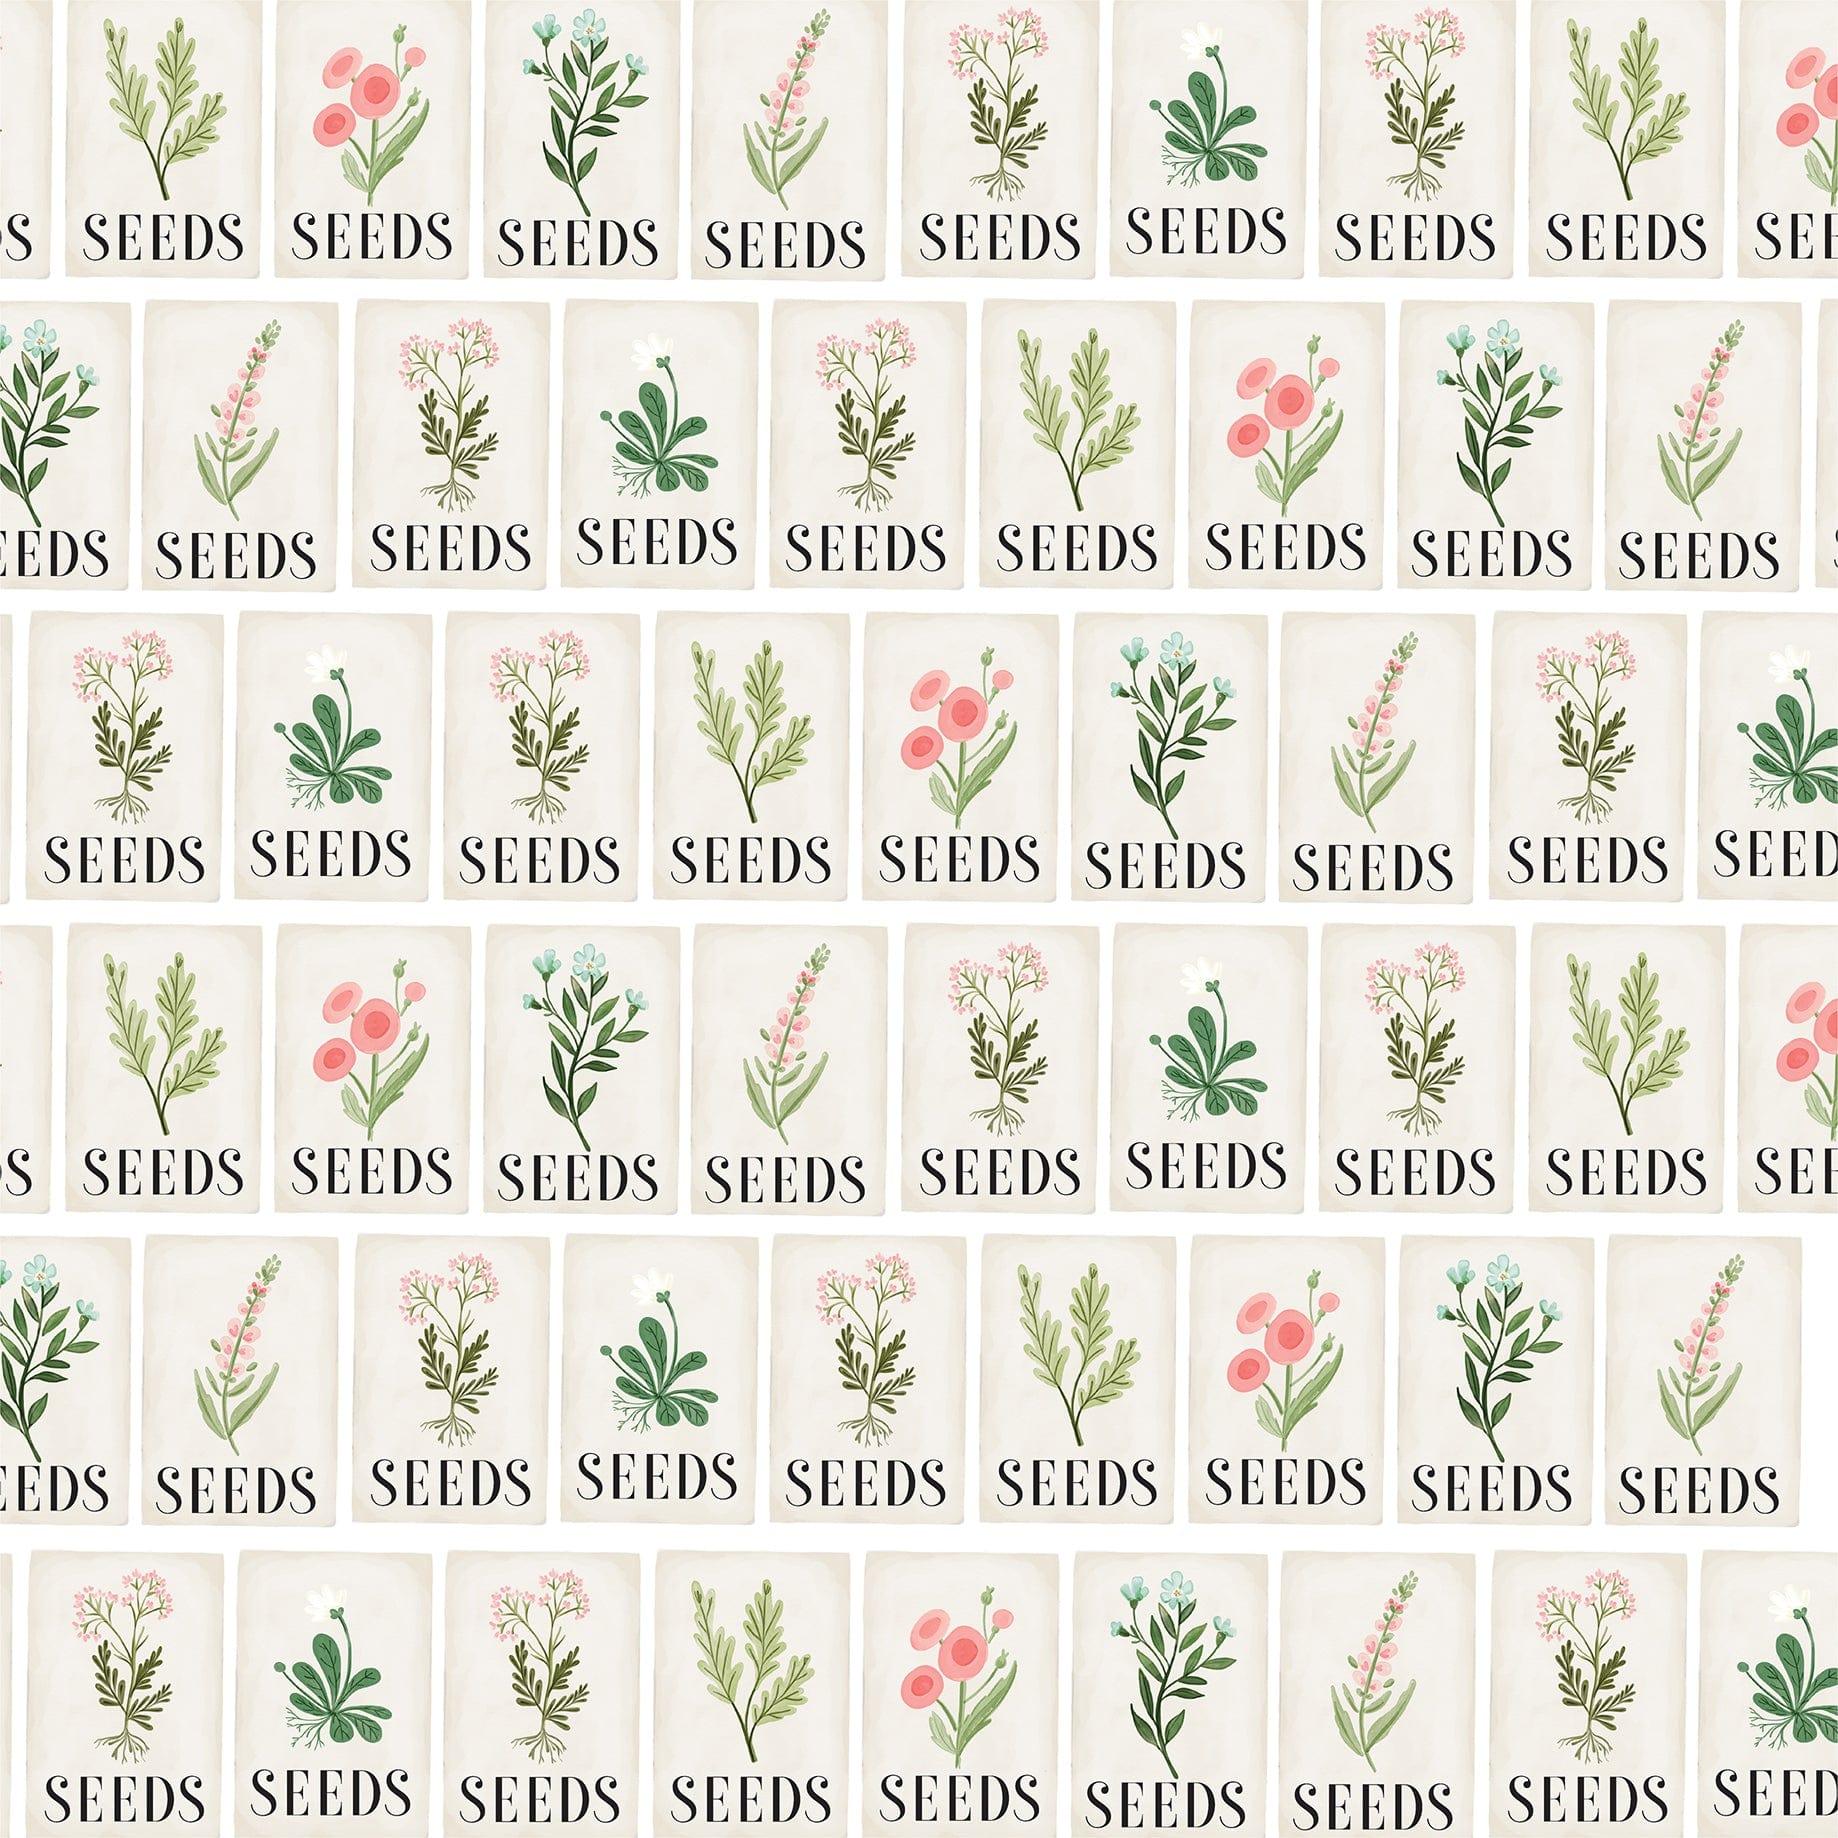 Flower Garden Collection Seeds 12 x 12 Double-Sided Scrapbook Paper by Carta Bella - Scrapbook Supply Companies